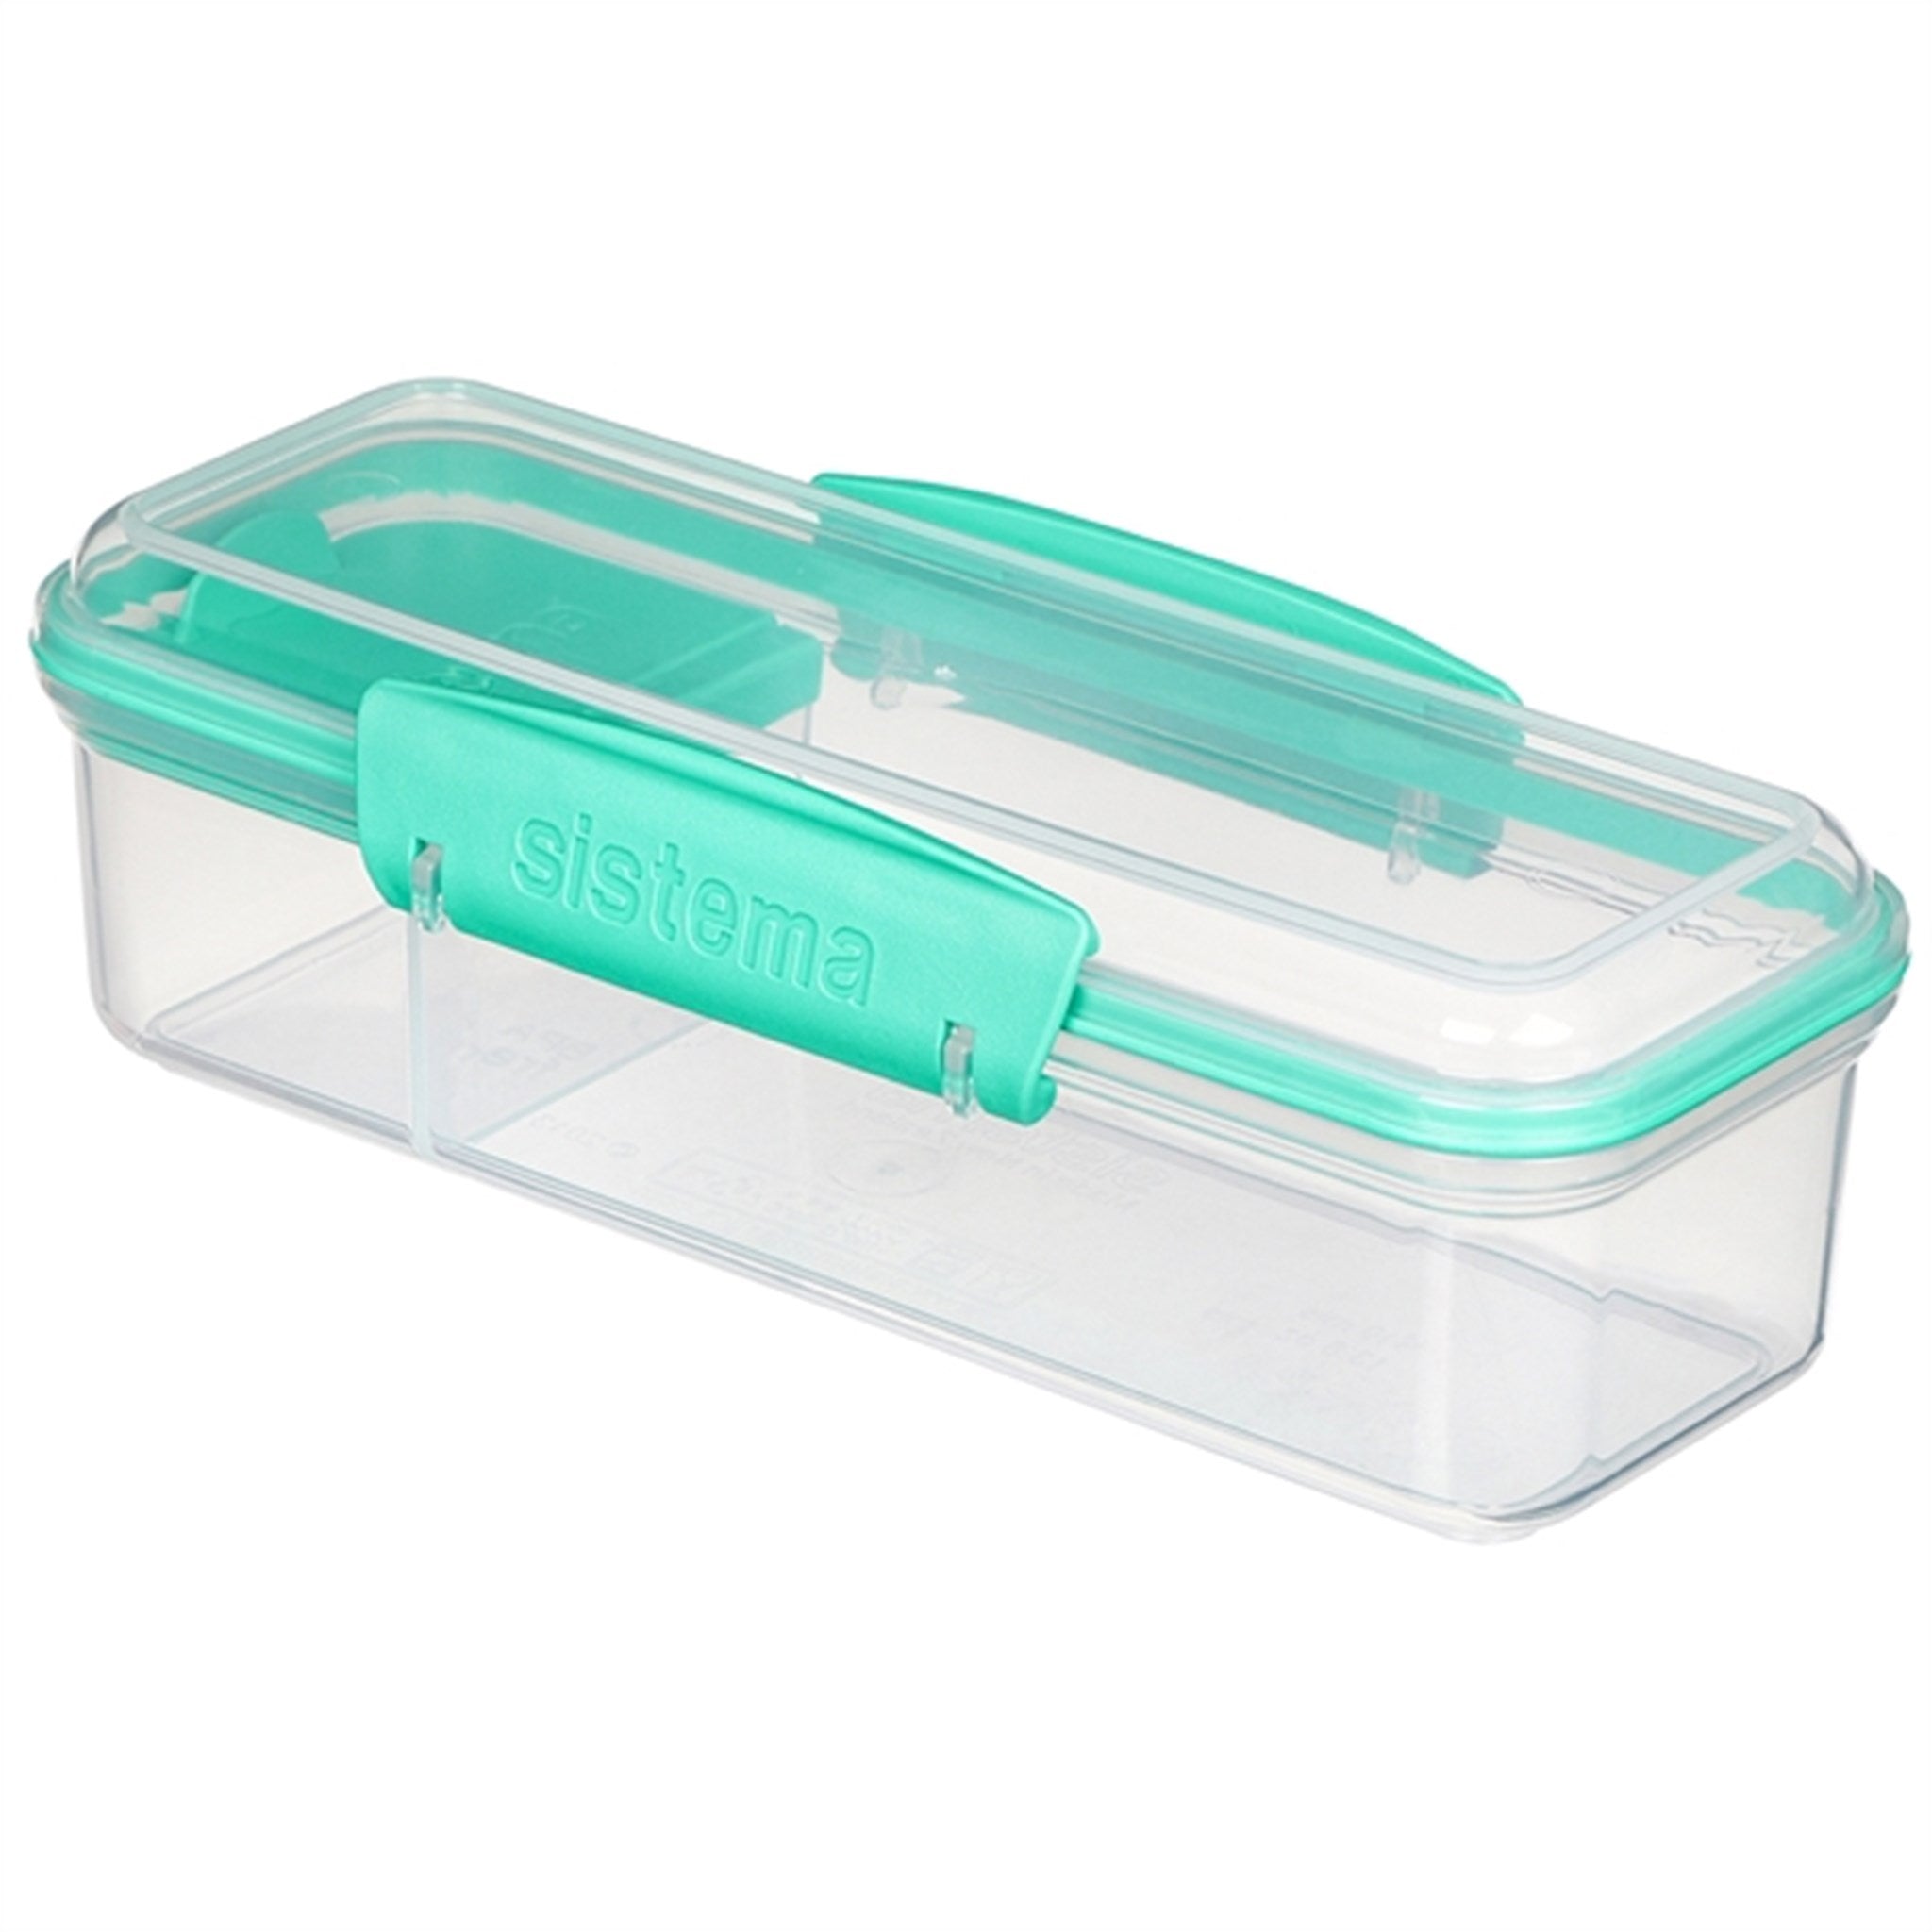 Sistema To Go Snack Attack Lunchlåda 410 ml Minty Teal